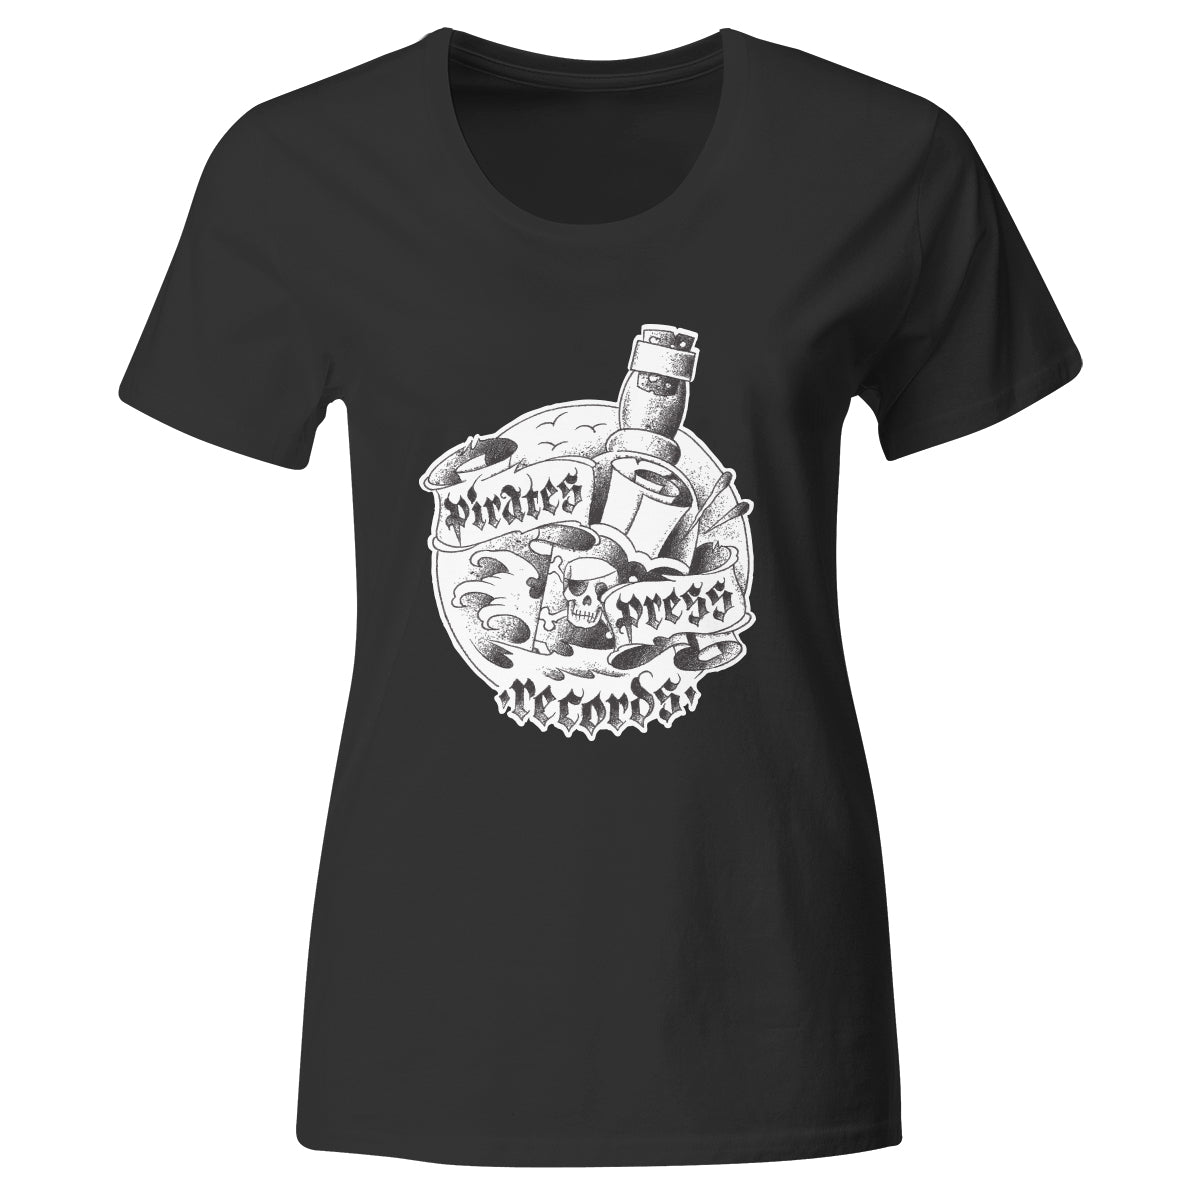 Pirates Press Records - Bottle - White on Black - T-Shirt - Fitted